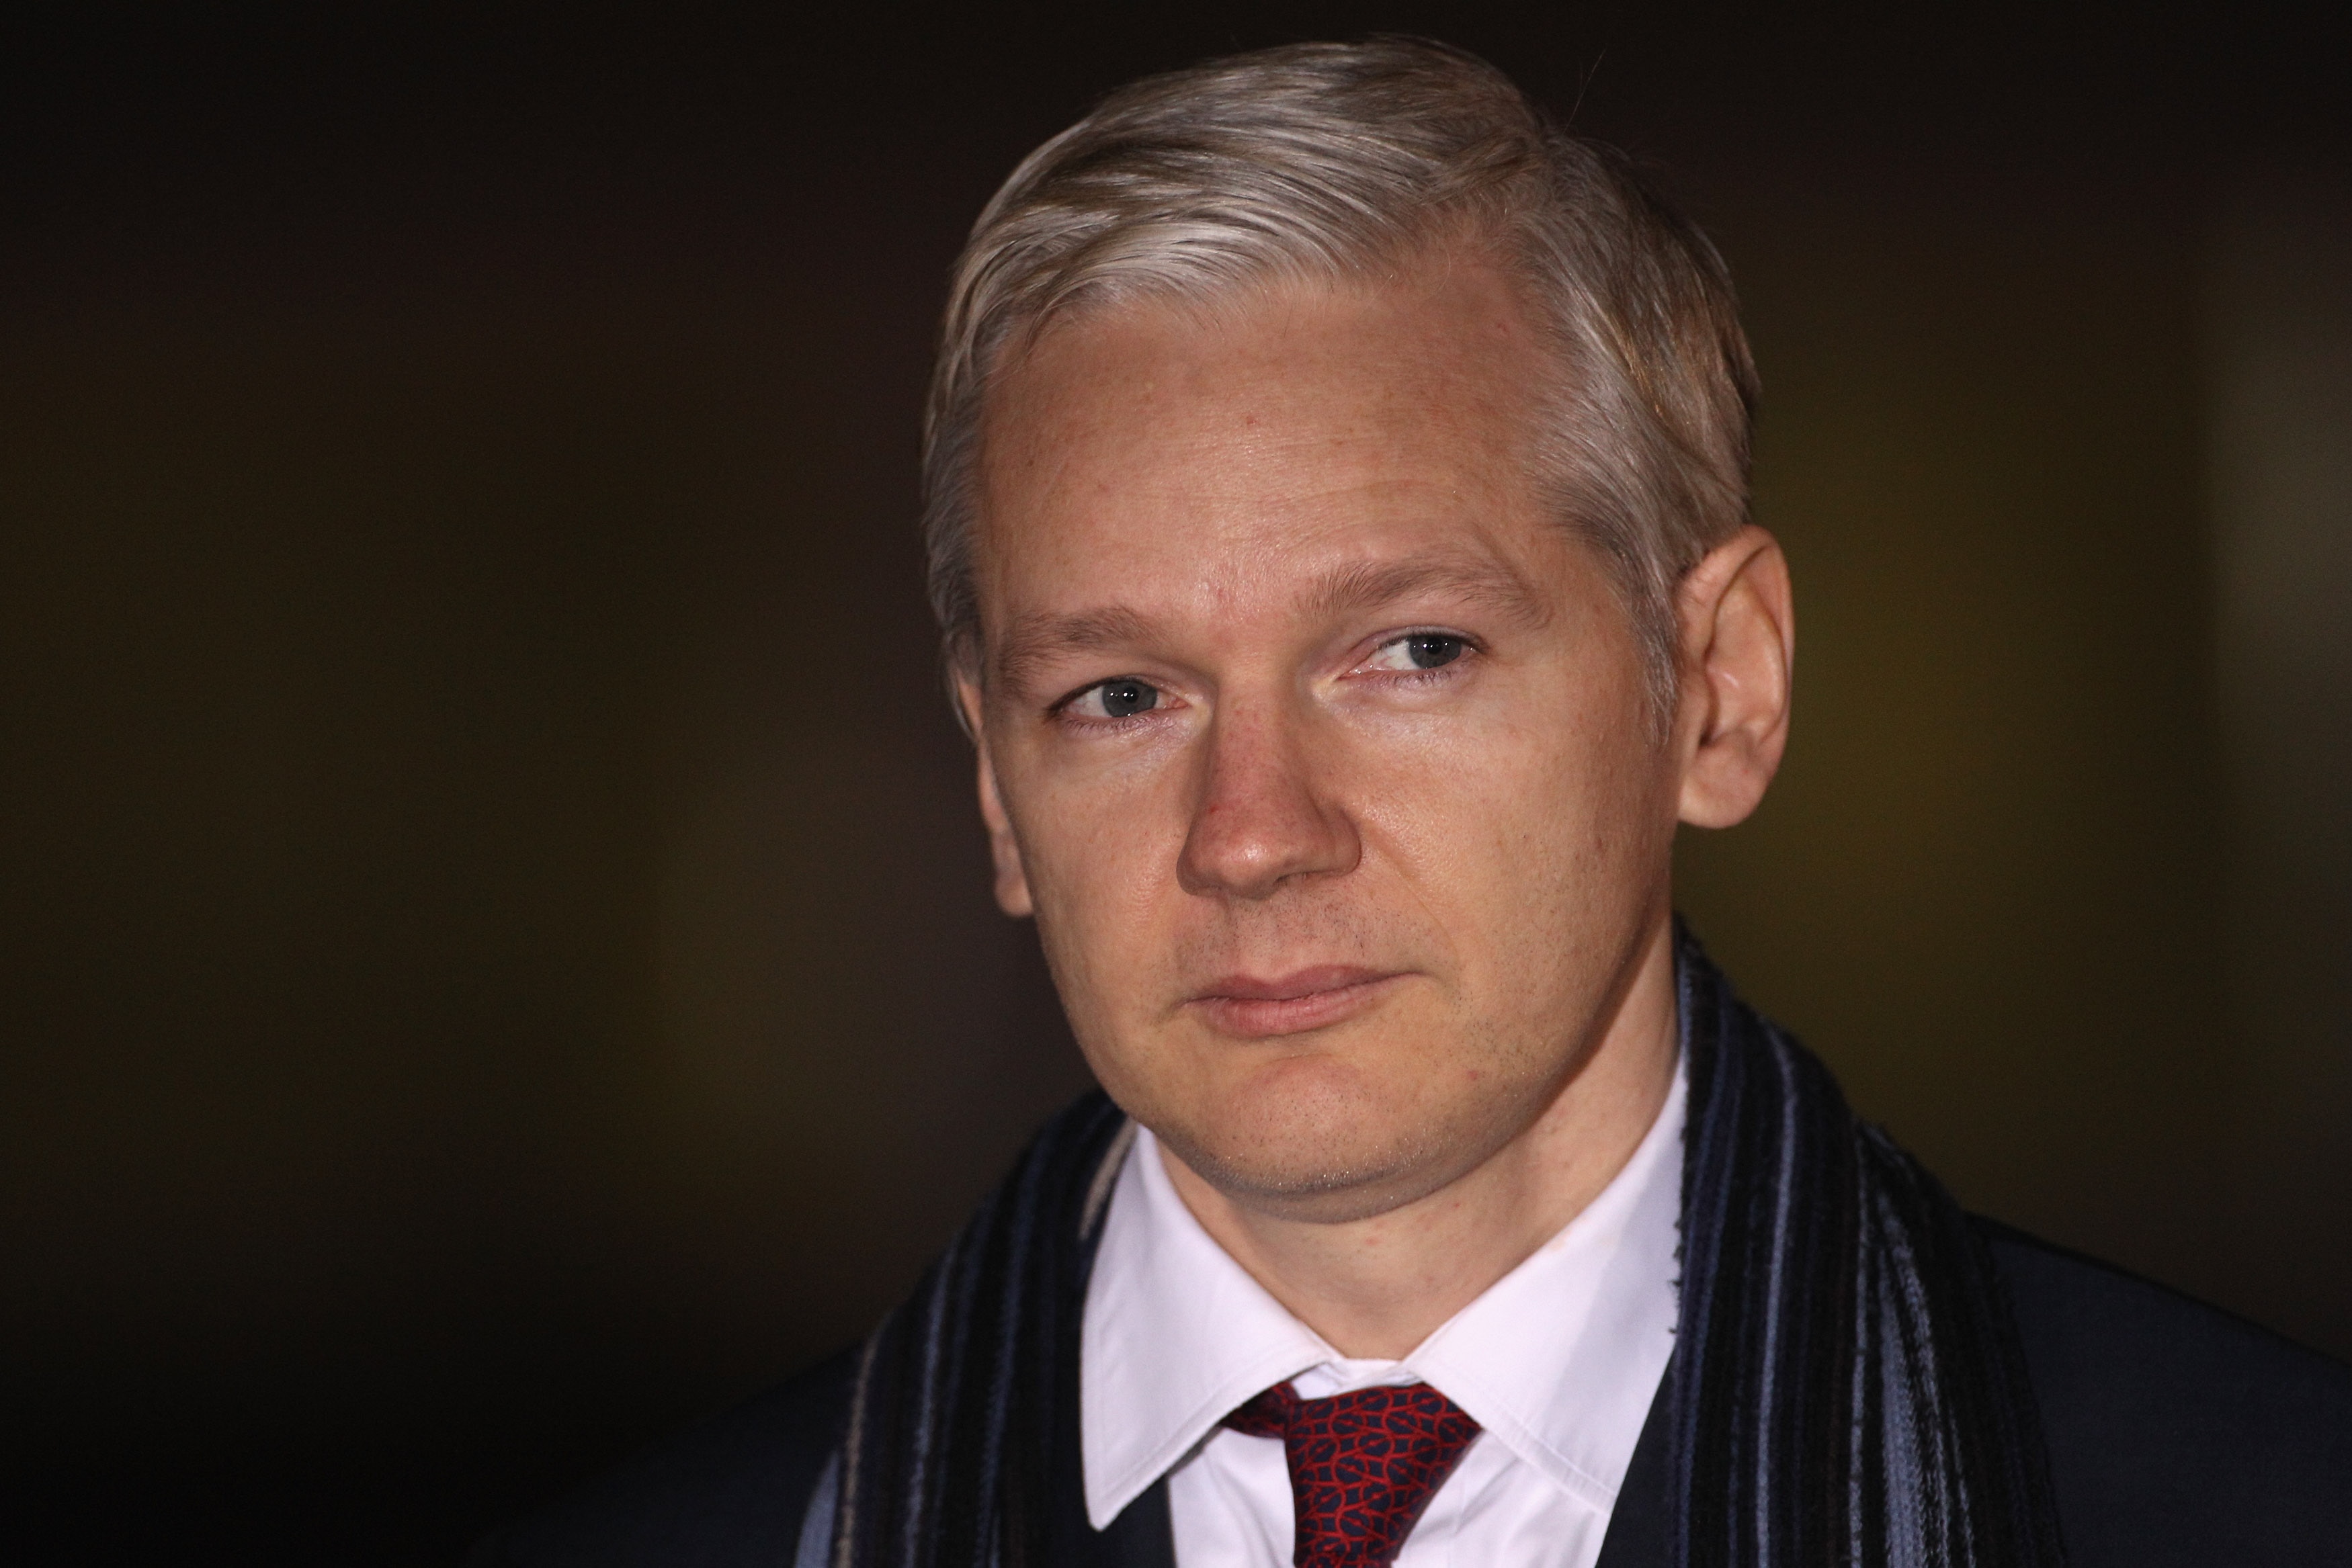 Julian Assange to leave Equadorian Embassy, possibly surrender to